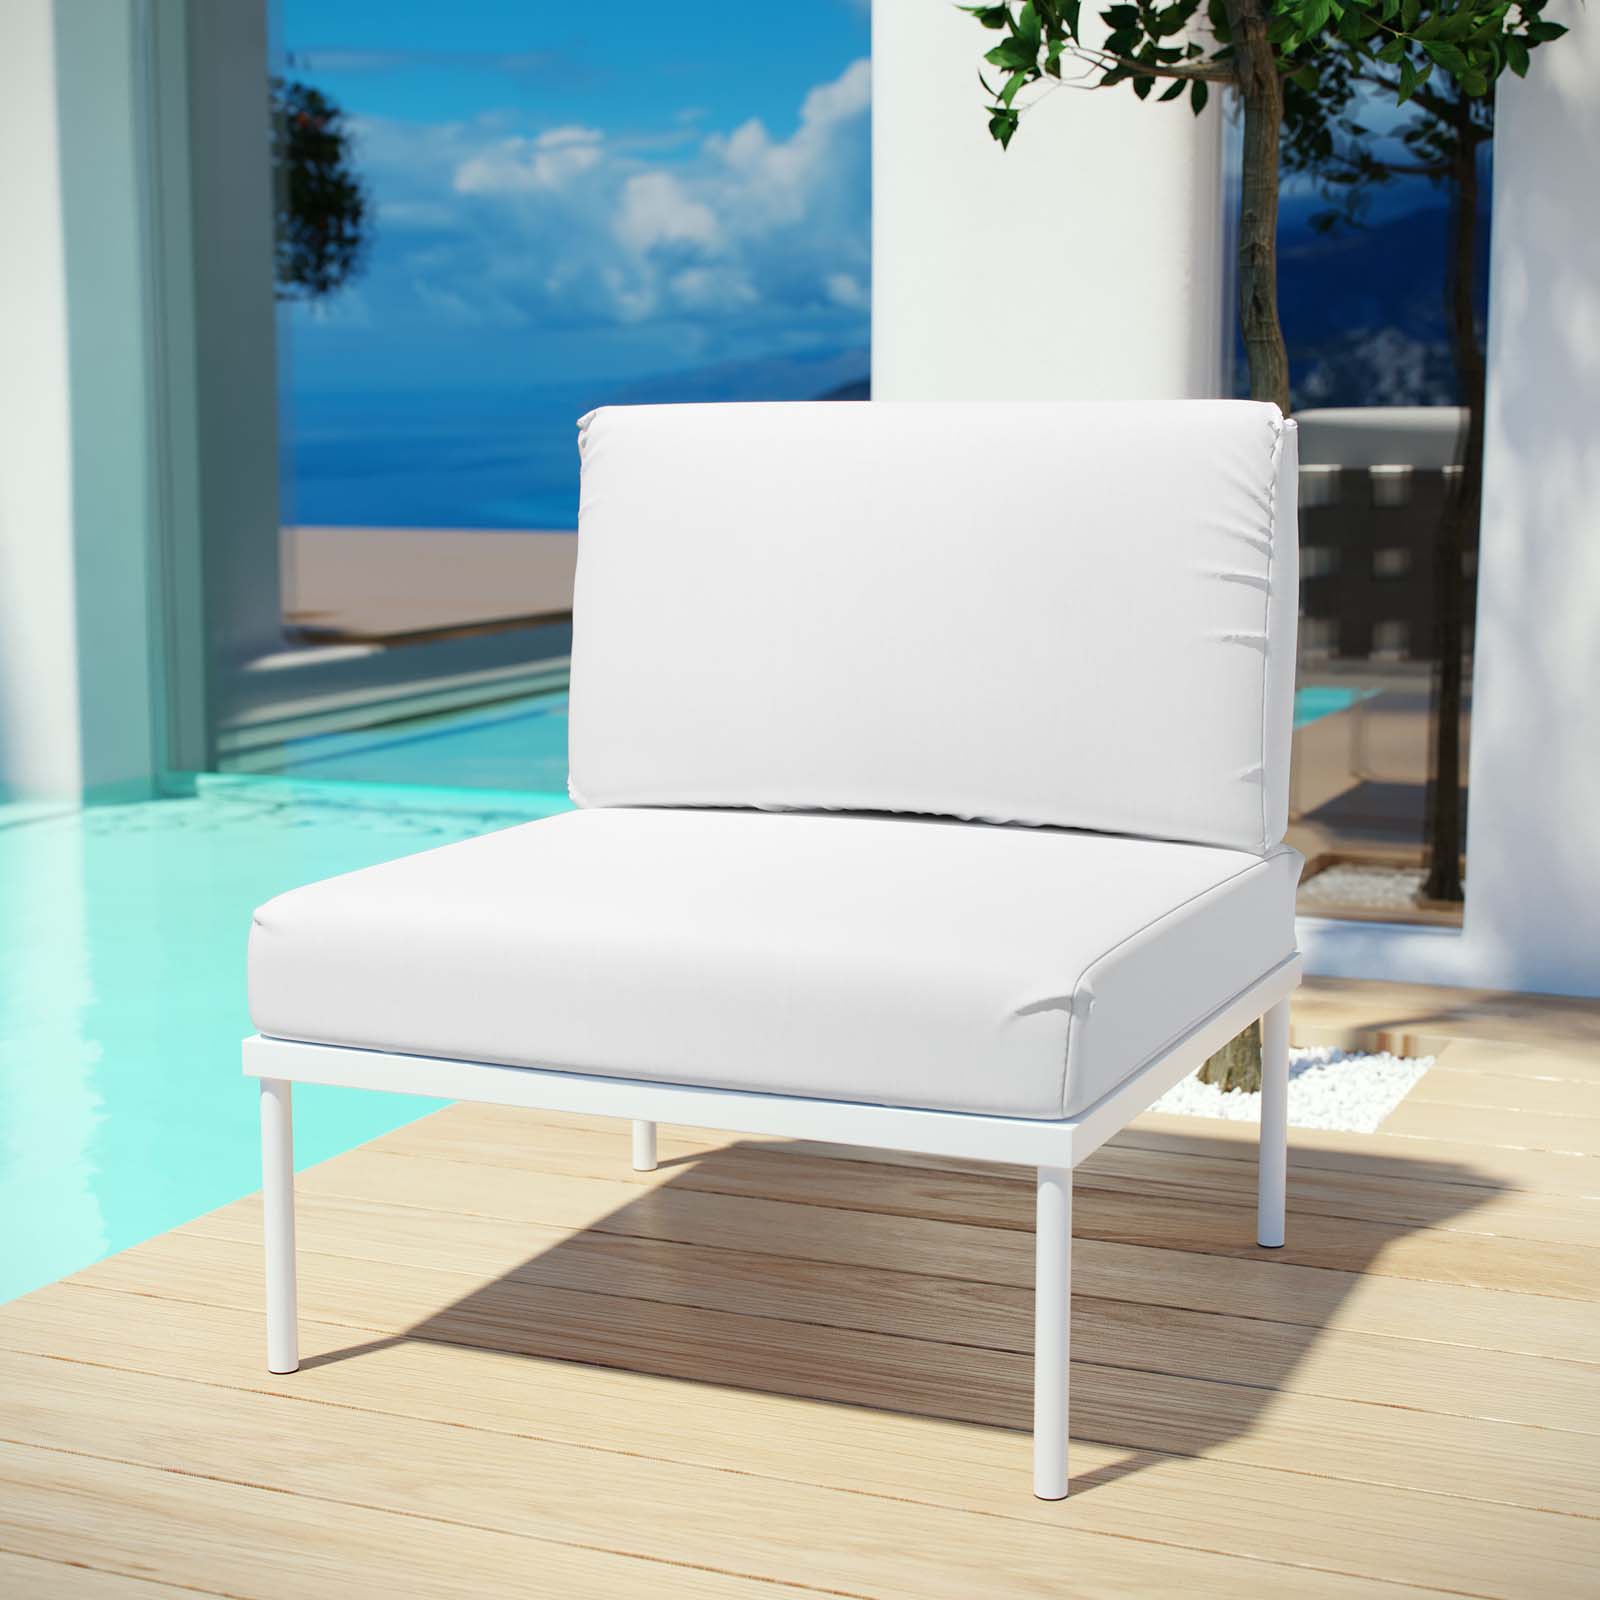 Modern Contemporary Urban Design Outdoor Patio Balcony Lounge Chair, White, Rattan - image 5 of 5